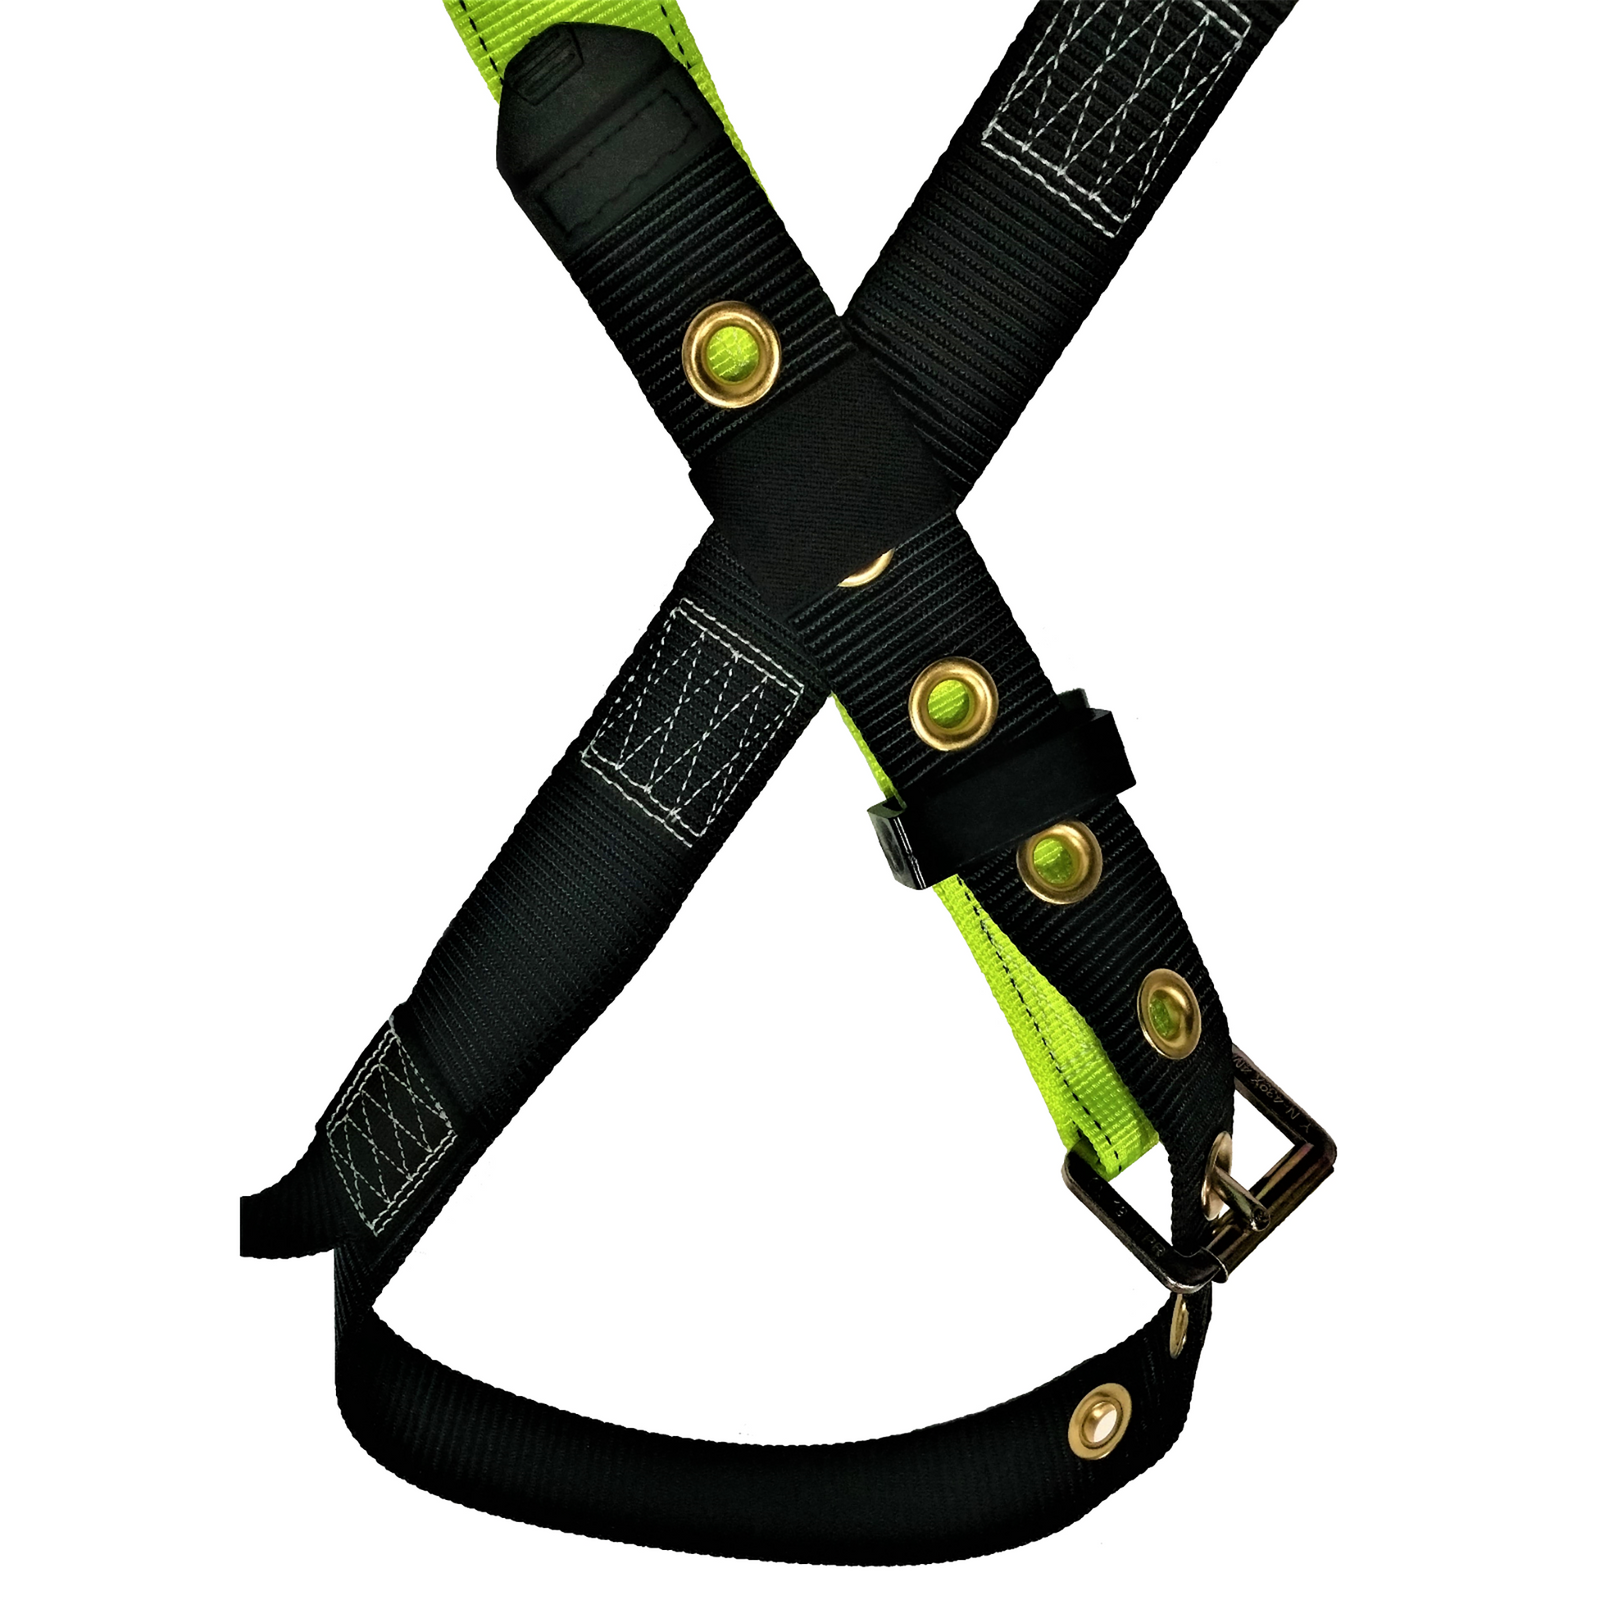 Close up show the Hi-vis and black strap with grommets of the JORESTECH harness that ties around each leg.